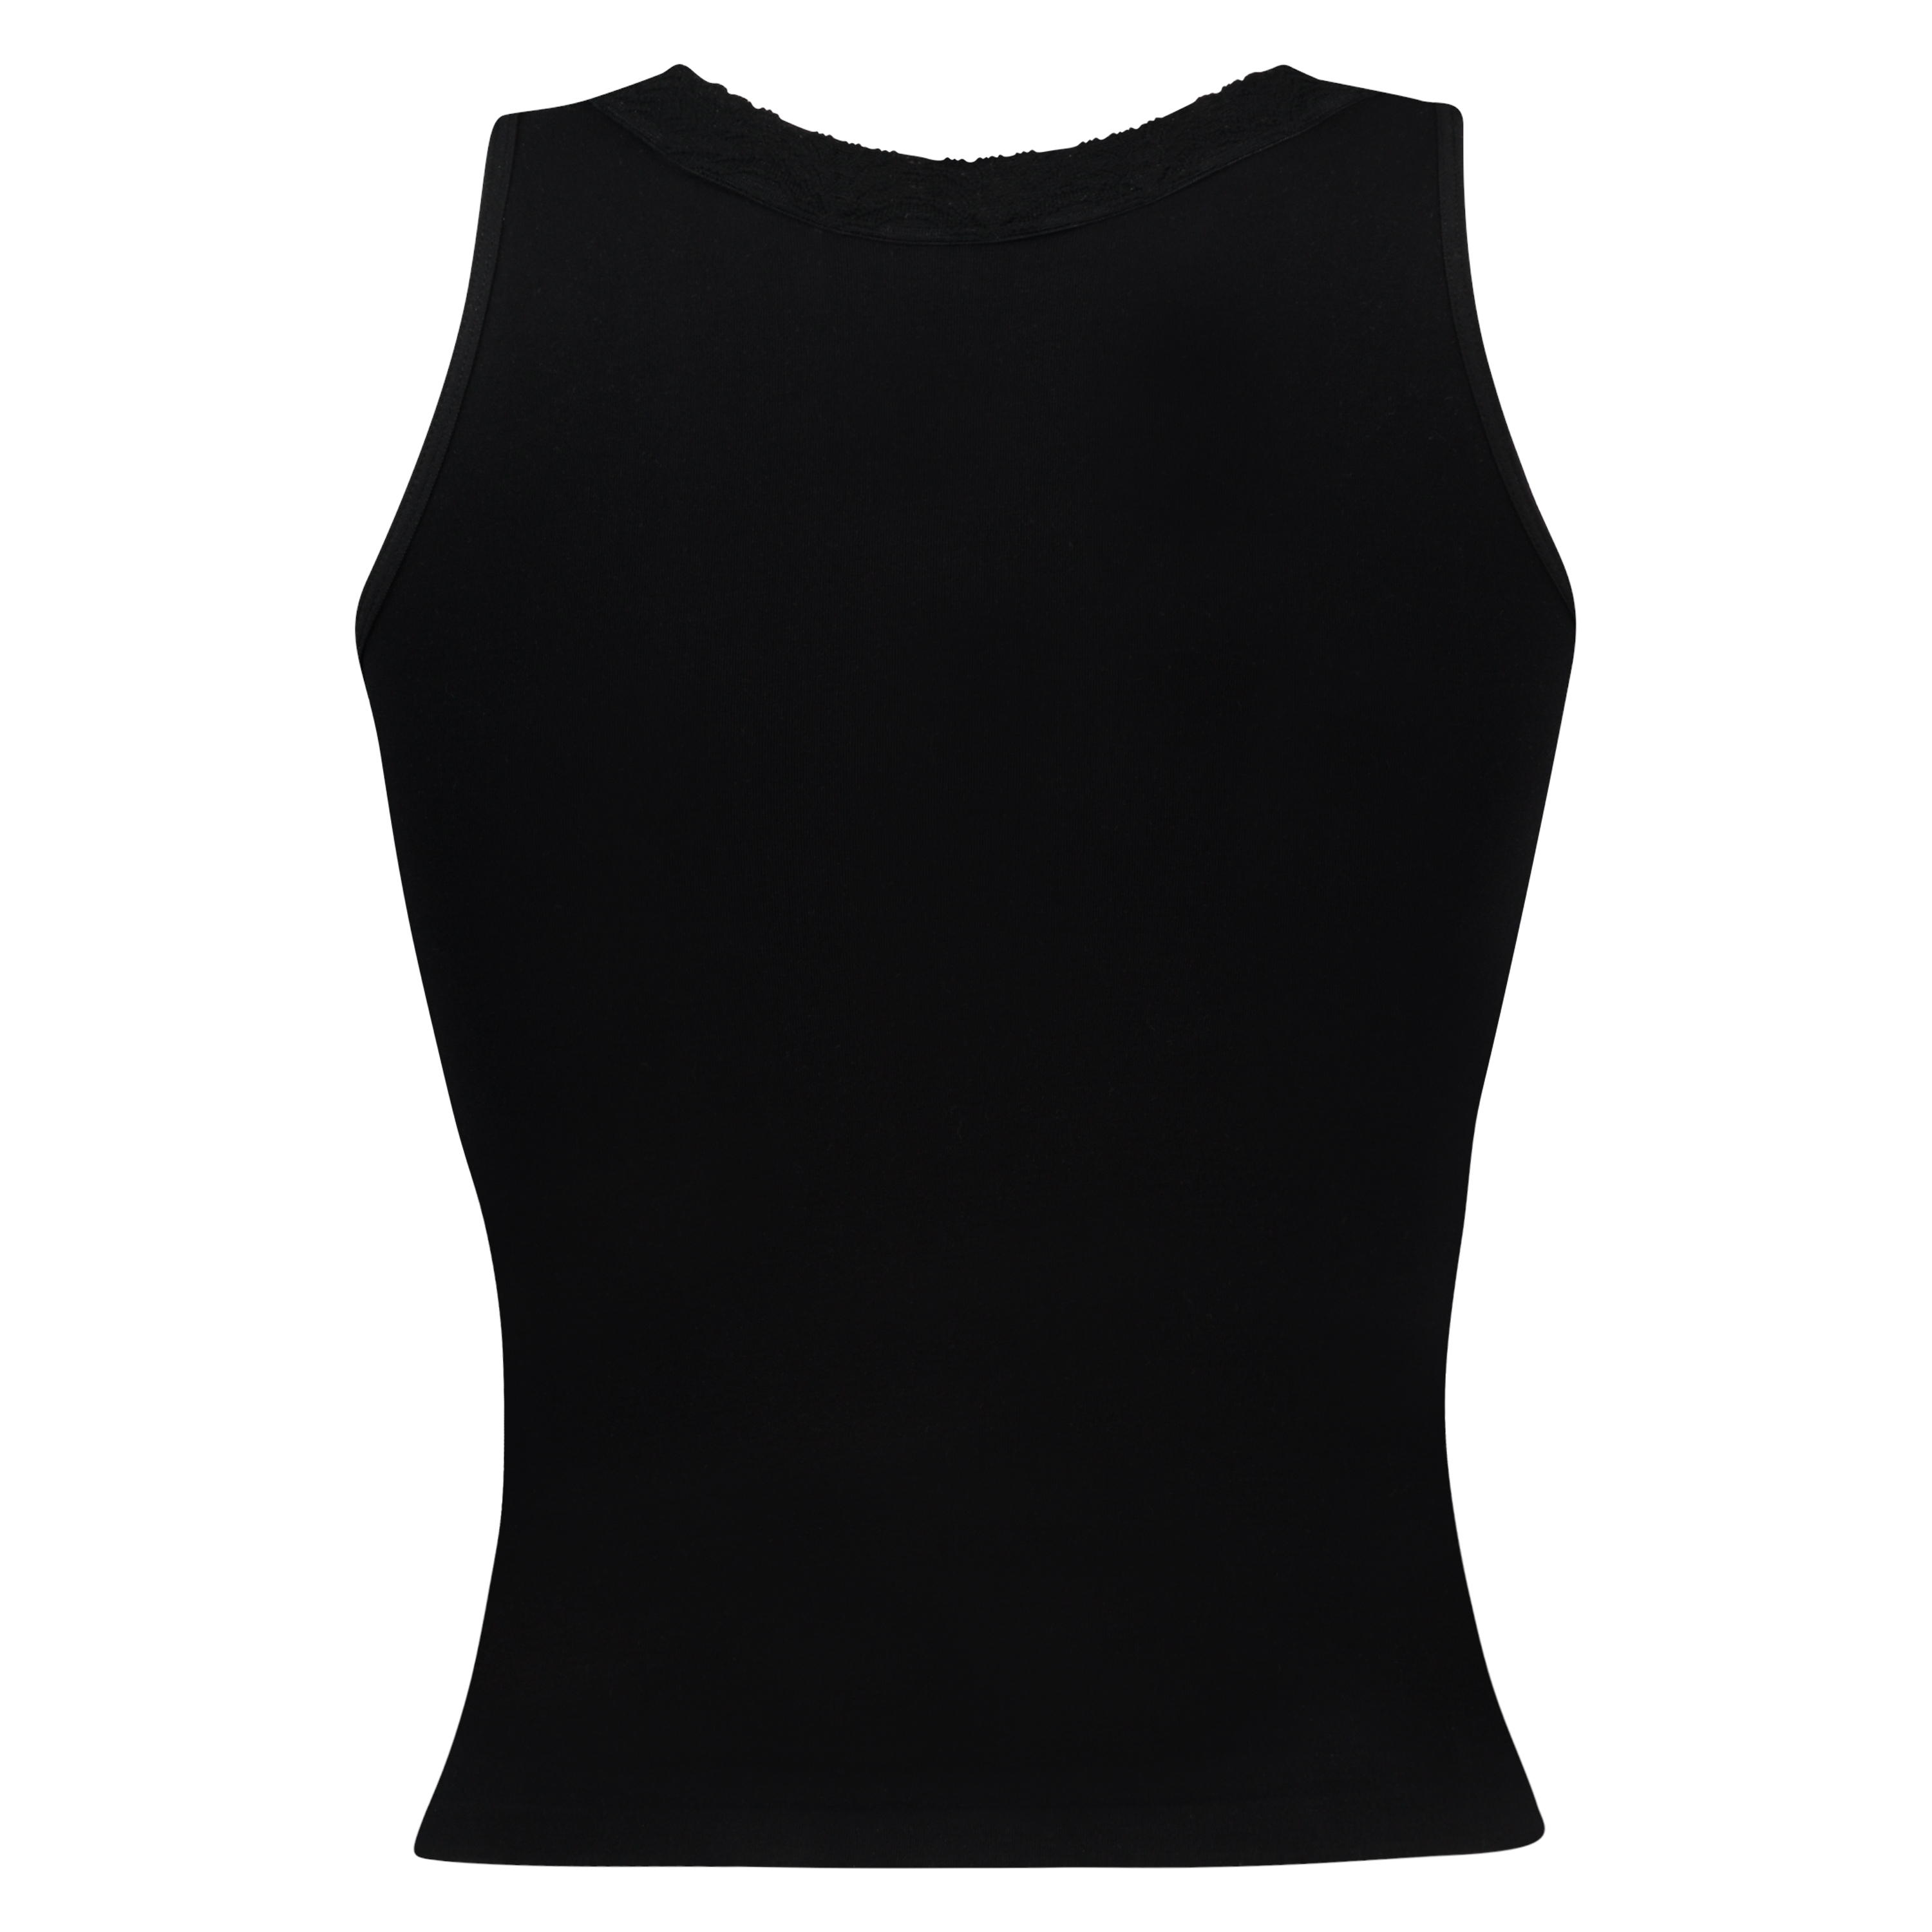 Firming top - Level 2, Black, main